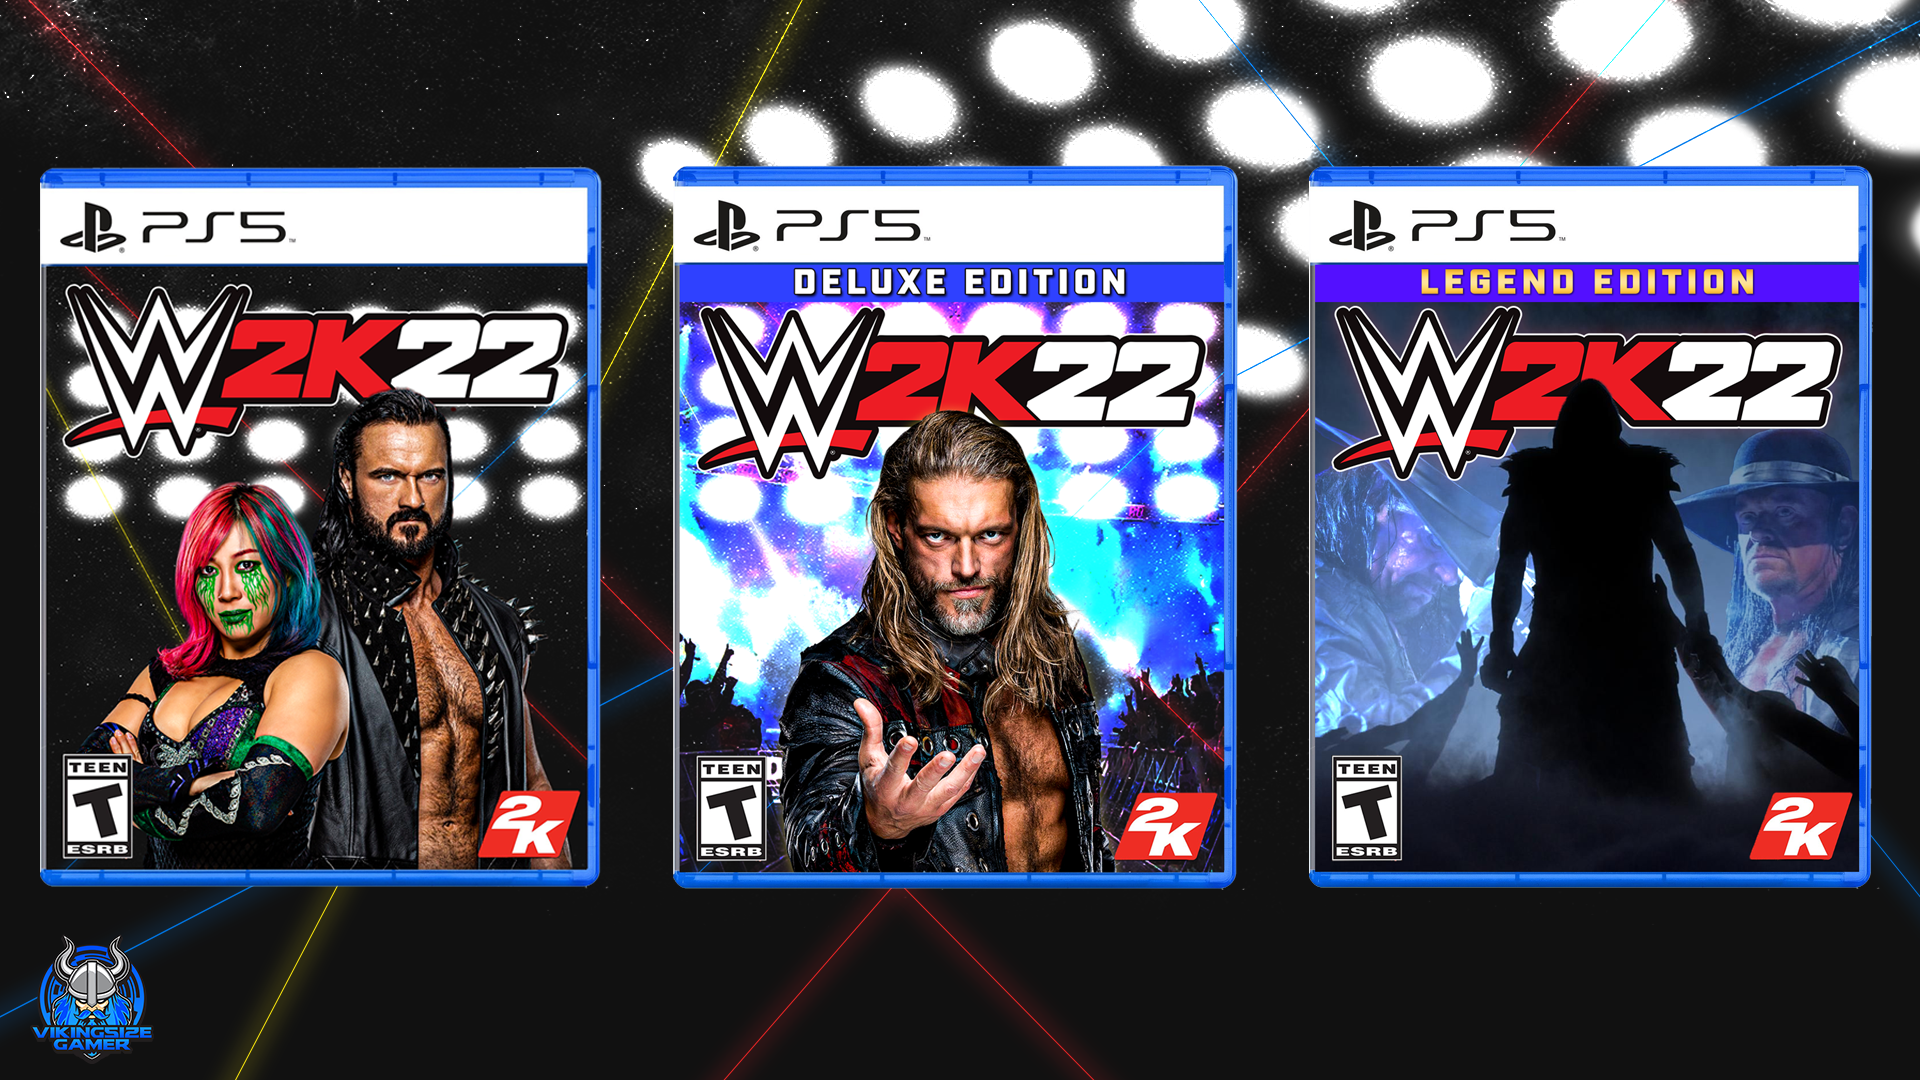 James Vikingsizegamer That S All Three Editions Of Wwe2k22 From My Reboot Series Revealed Which Is Your Favourite T Co Dggiofr3rf Twitter